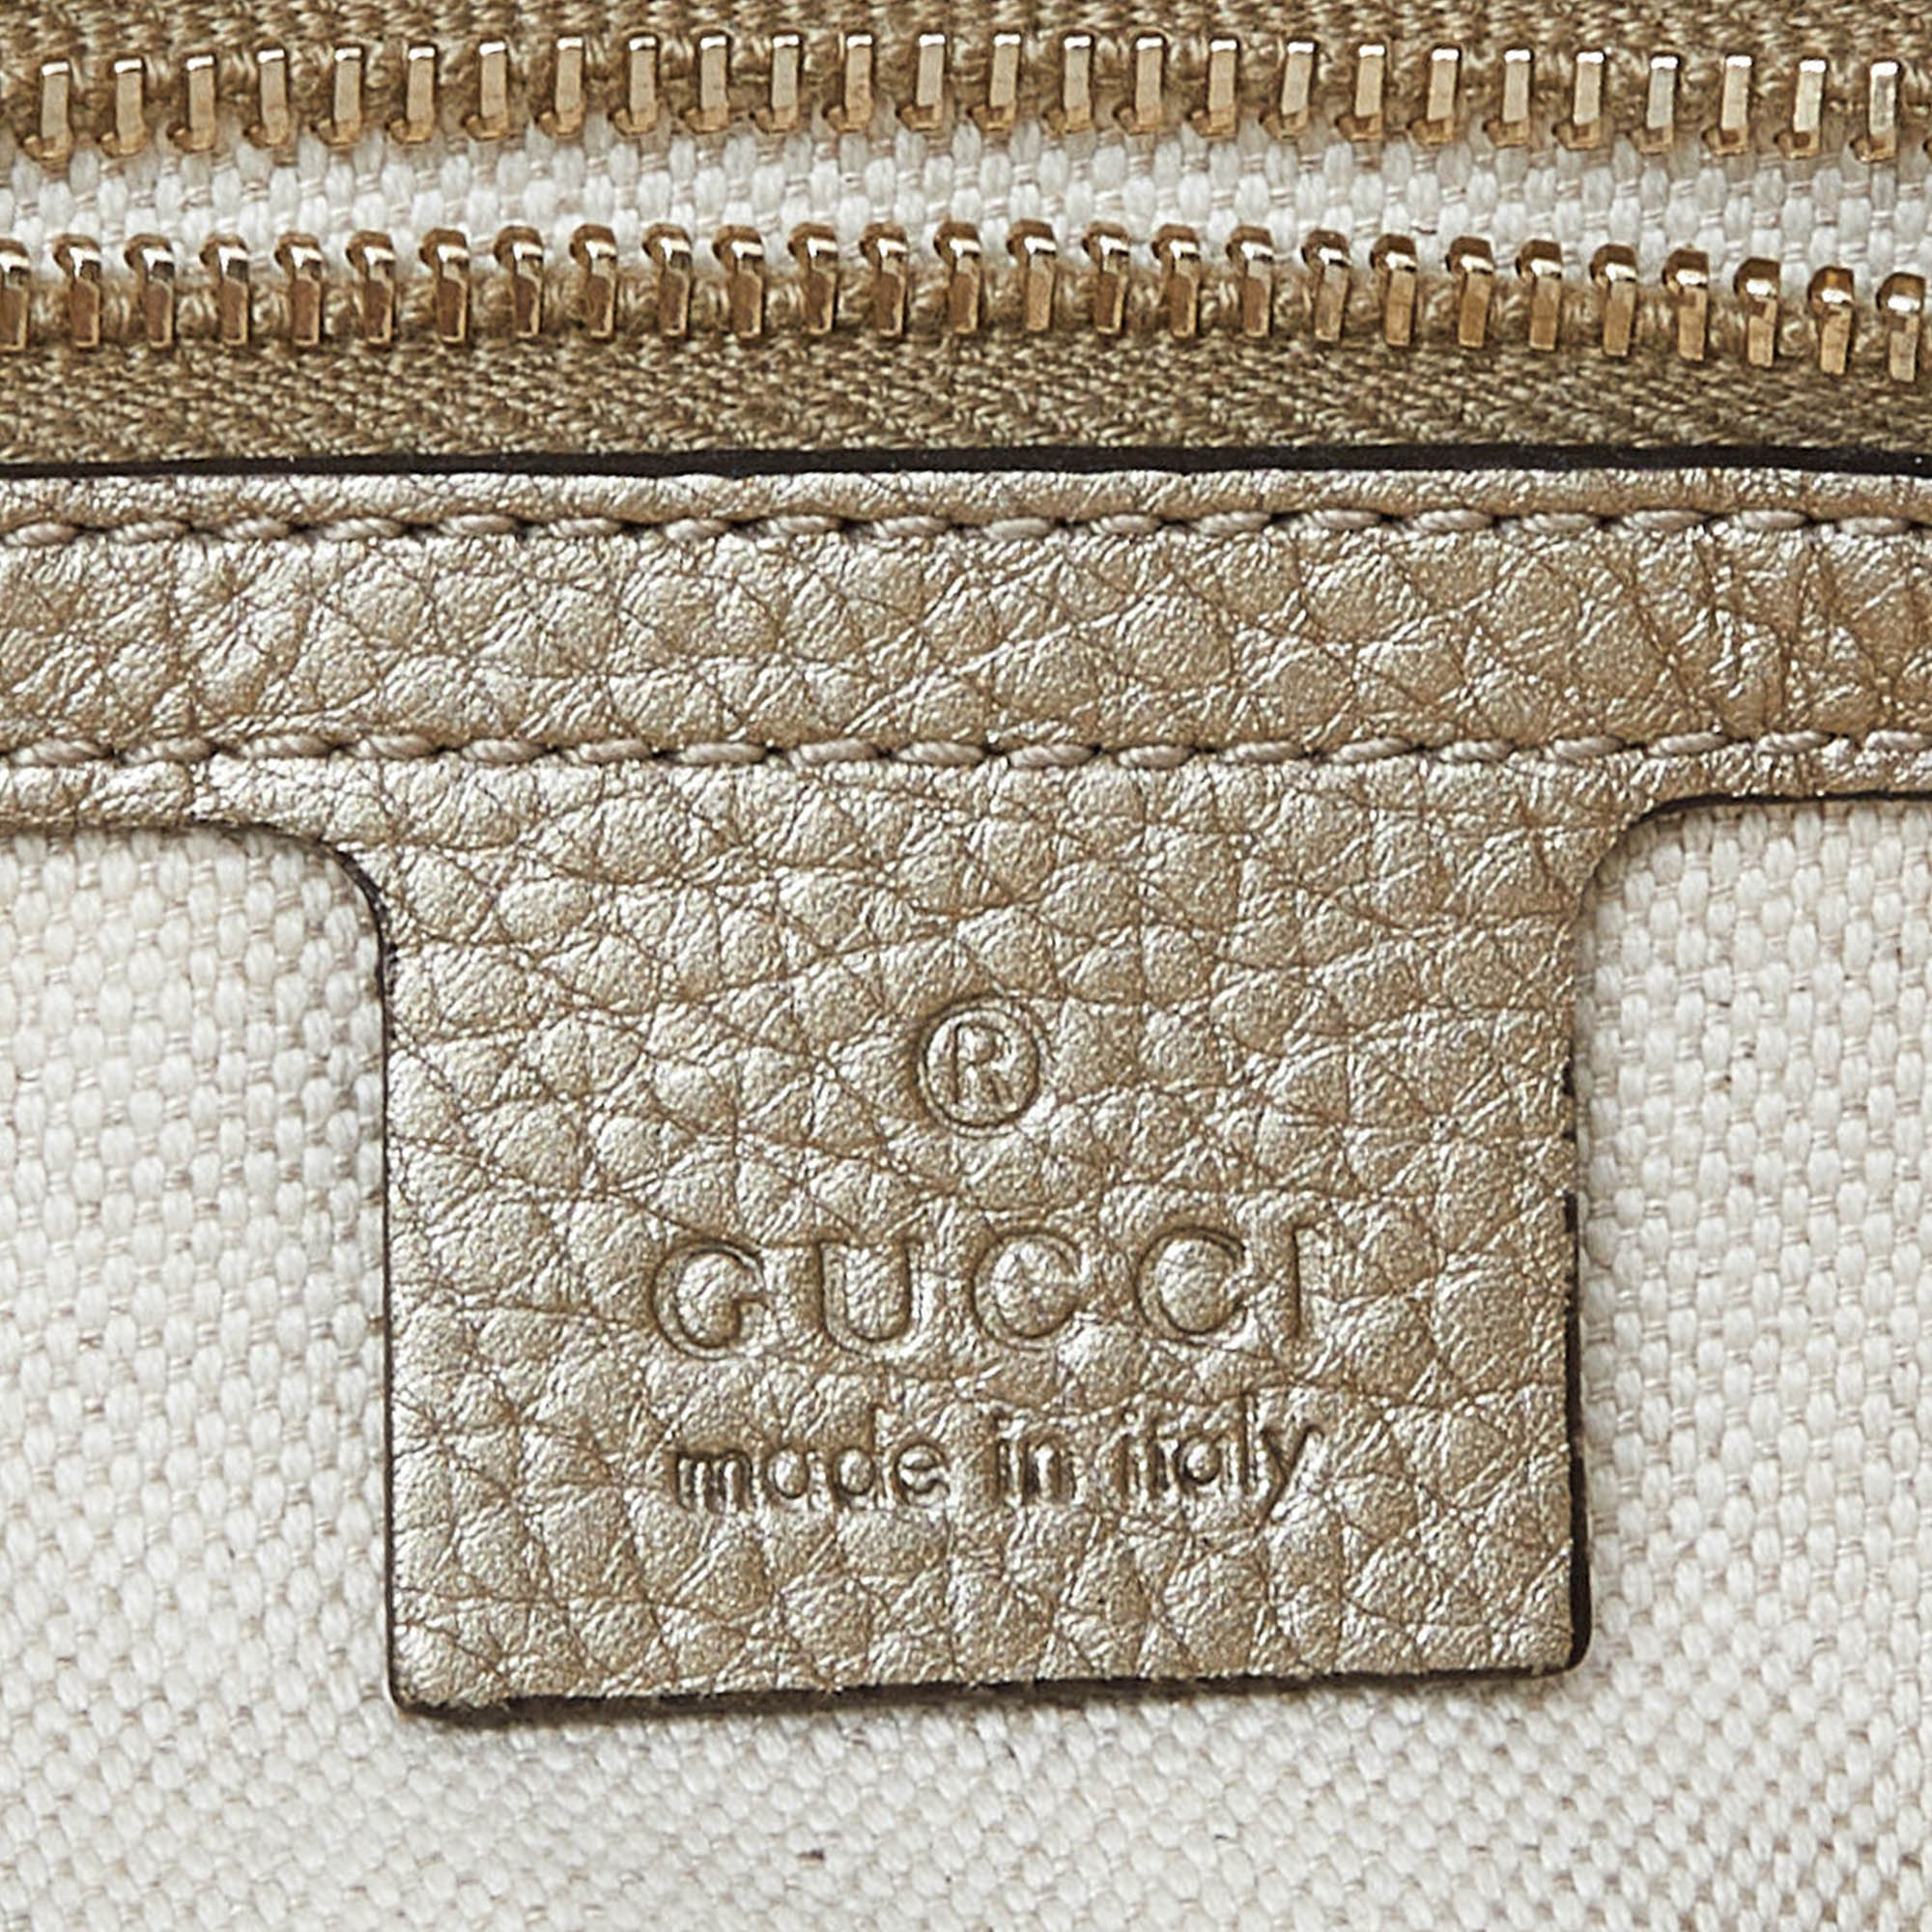 Gucci Beige/Gold GG Canvas And Leather Bella Flap Bag